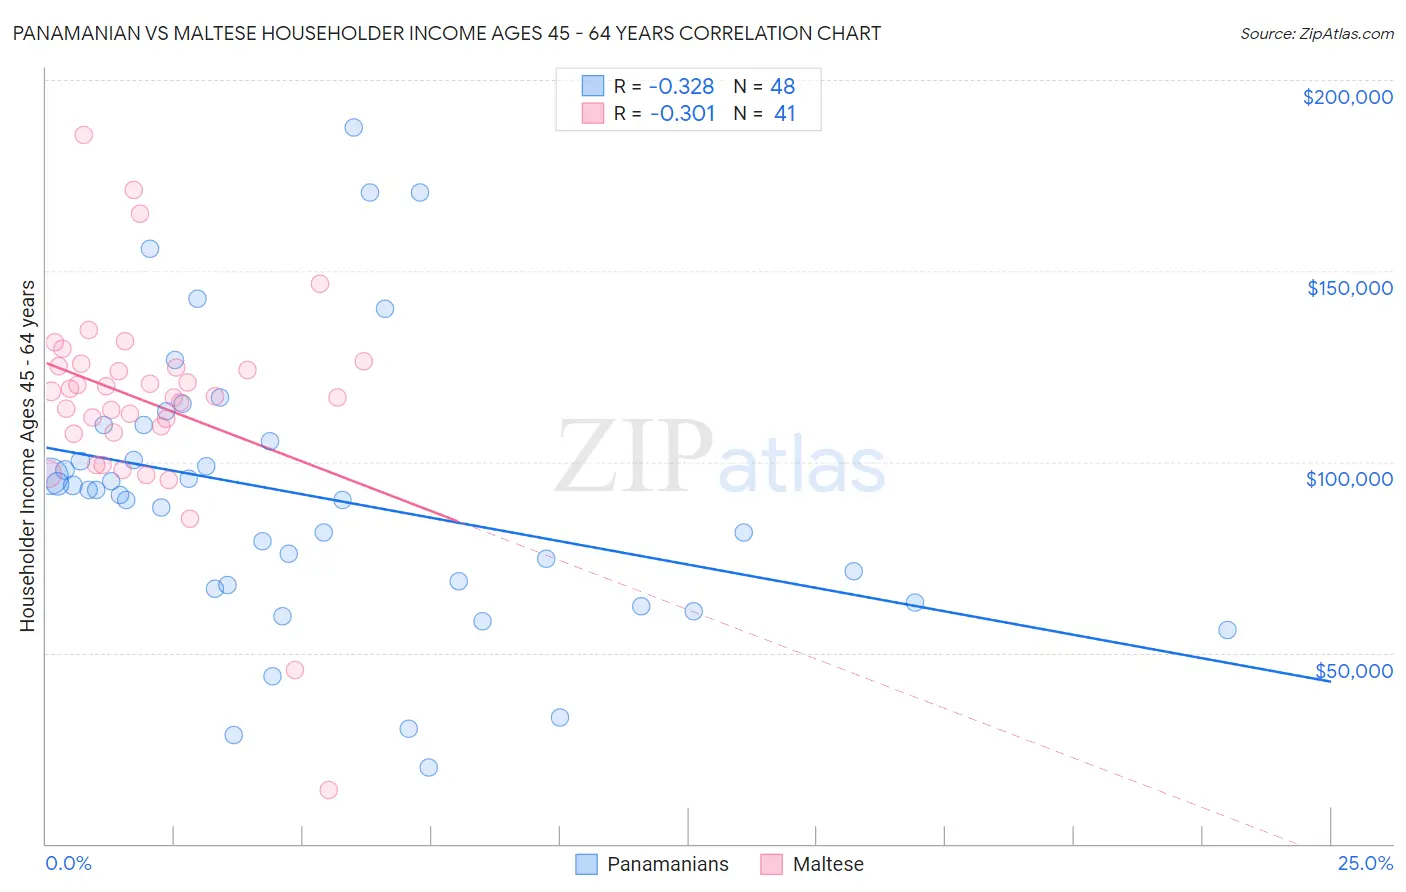 Panamanian vs Maltese Householder Income Ages 45 - 64 years